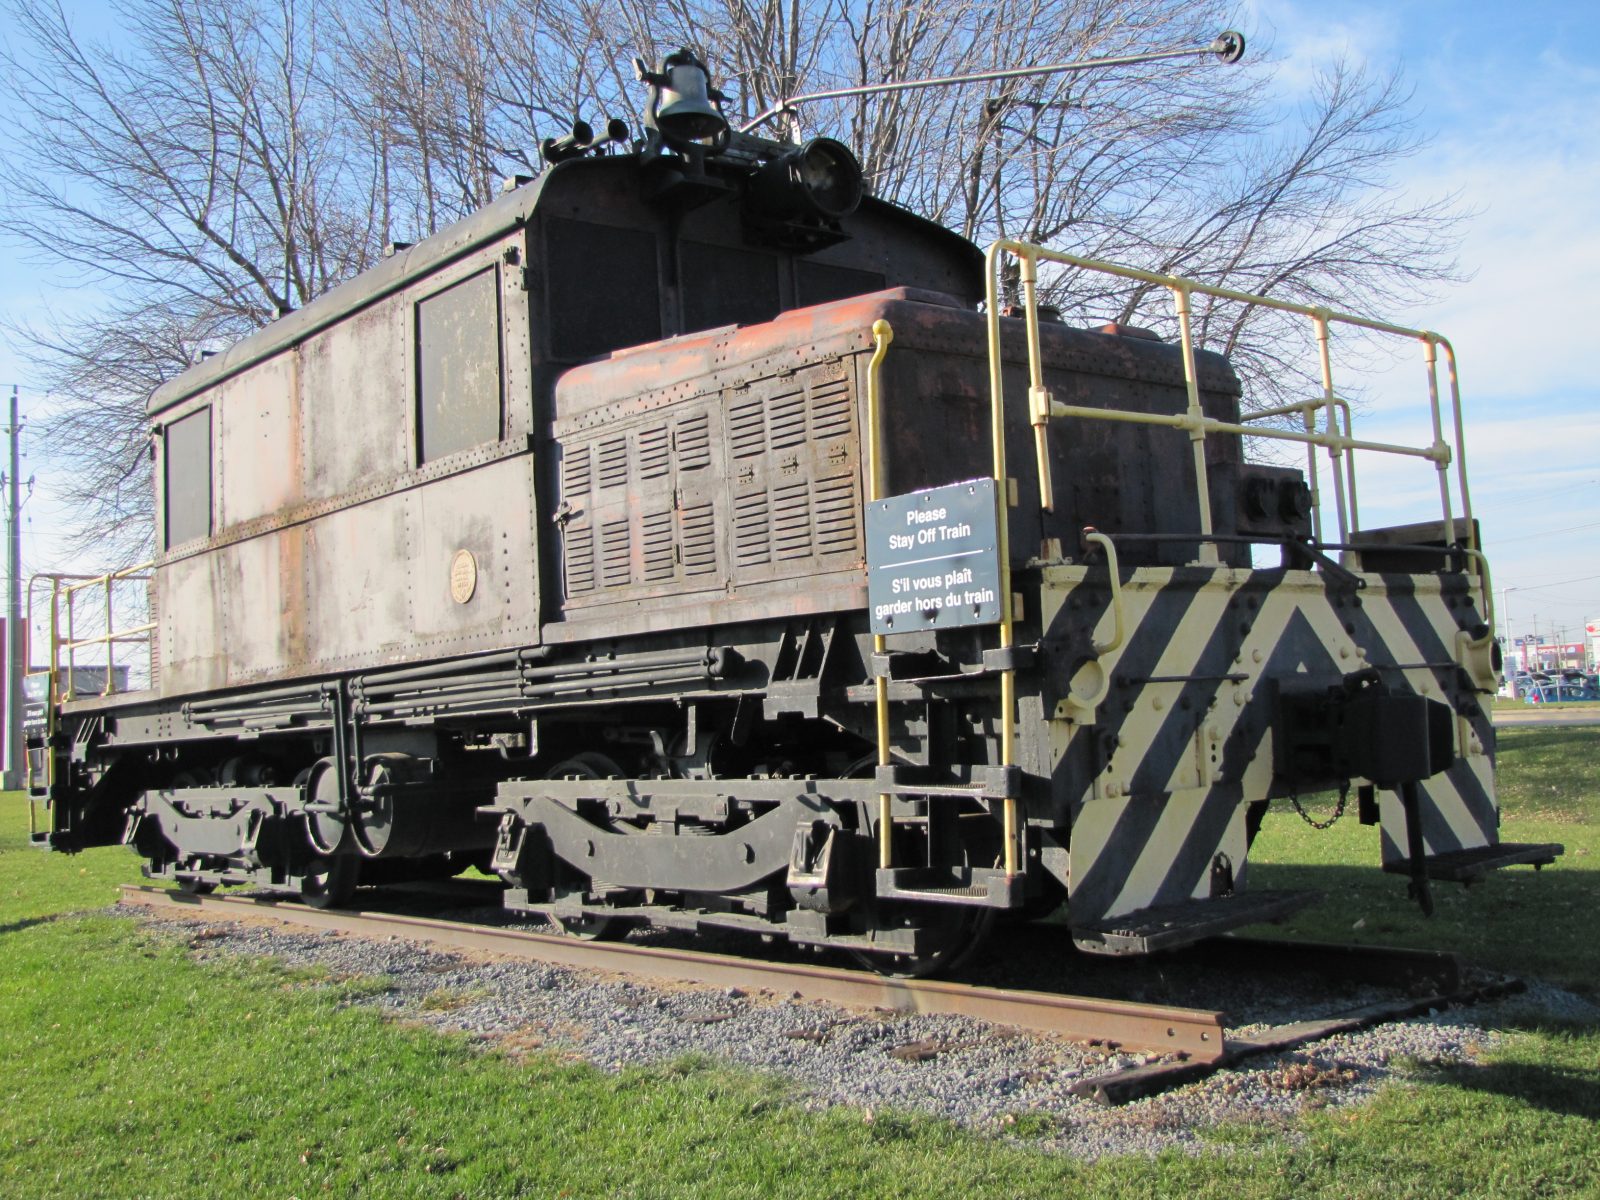 Petition wants Council to take responsibility for Locomotive #17